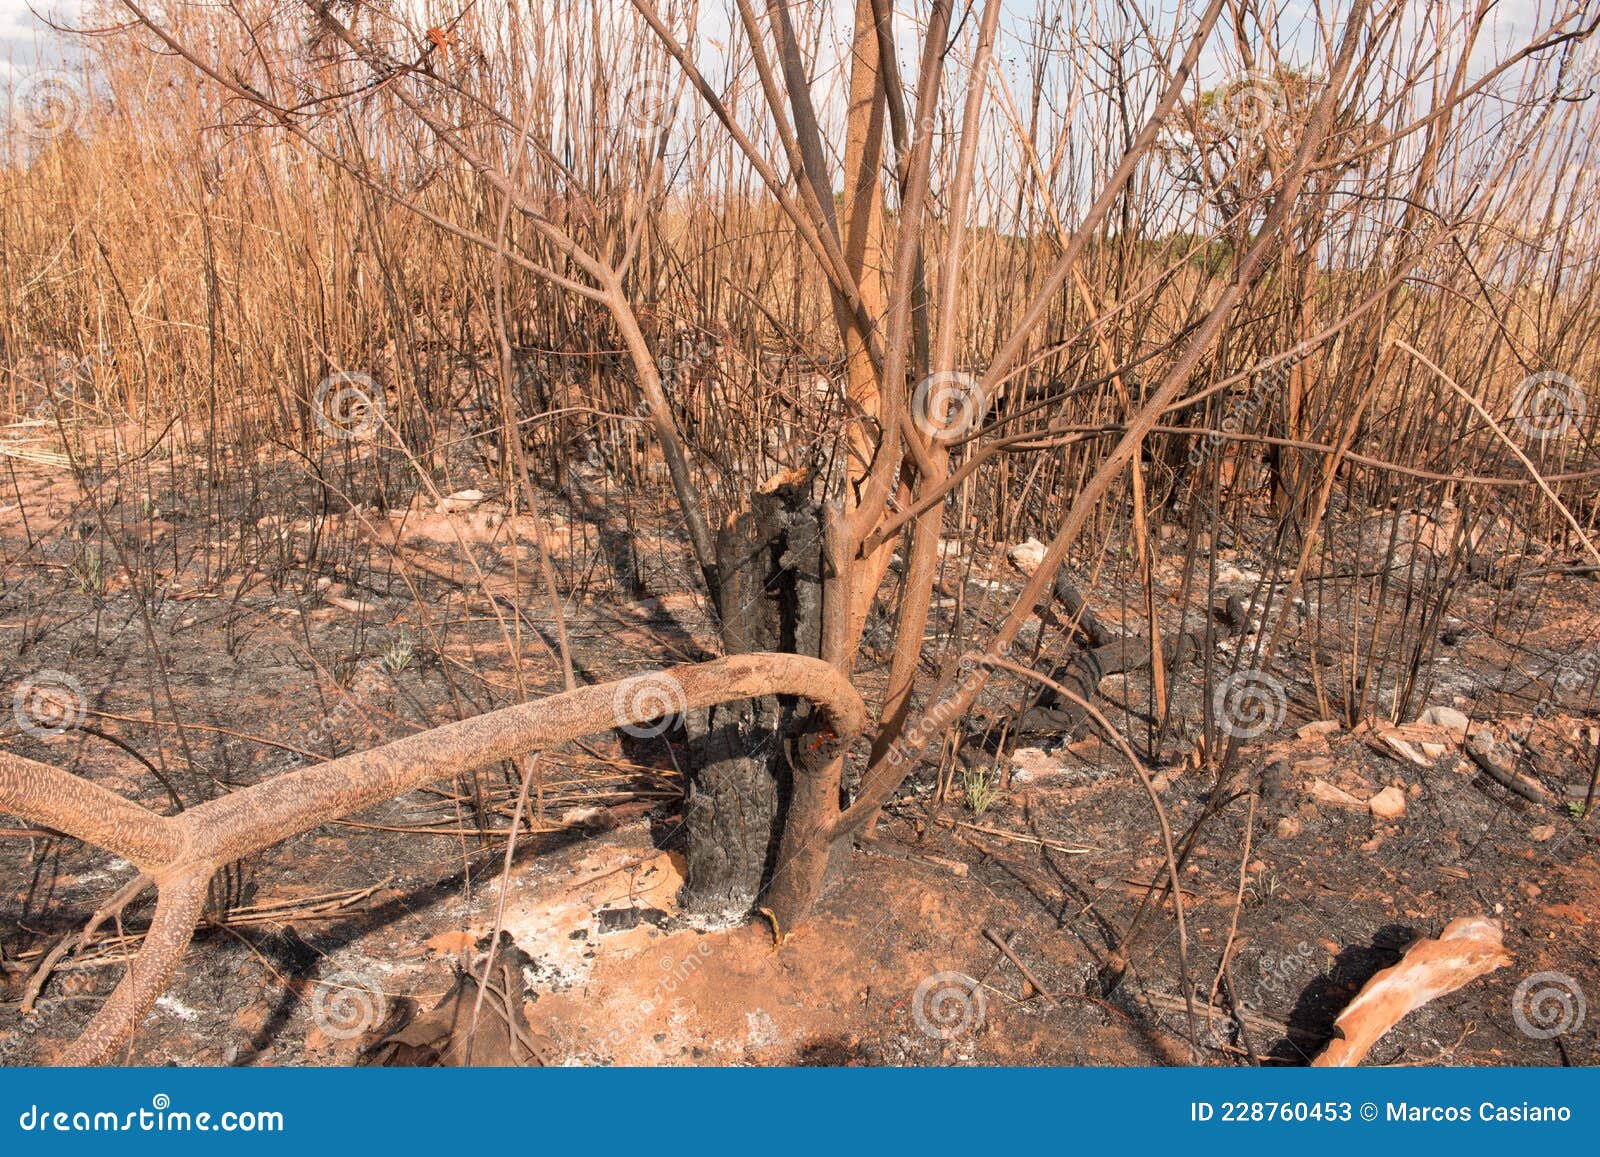 remains of a brush fire